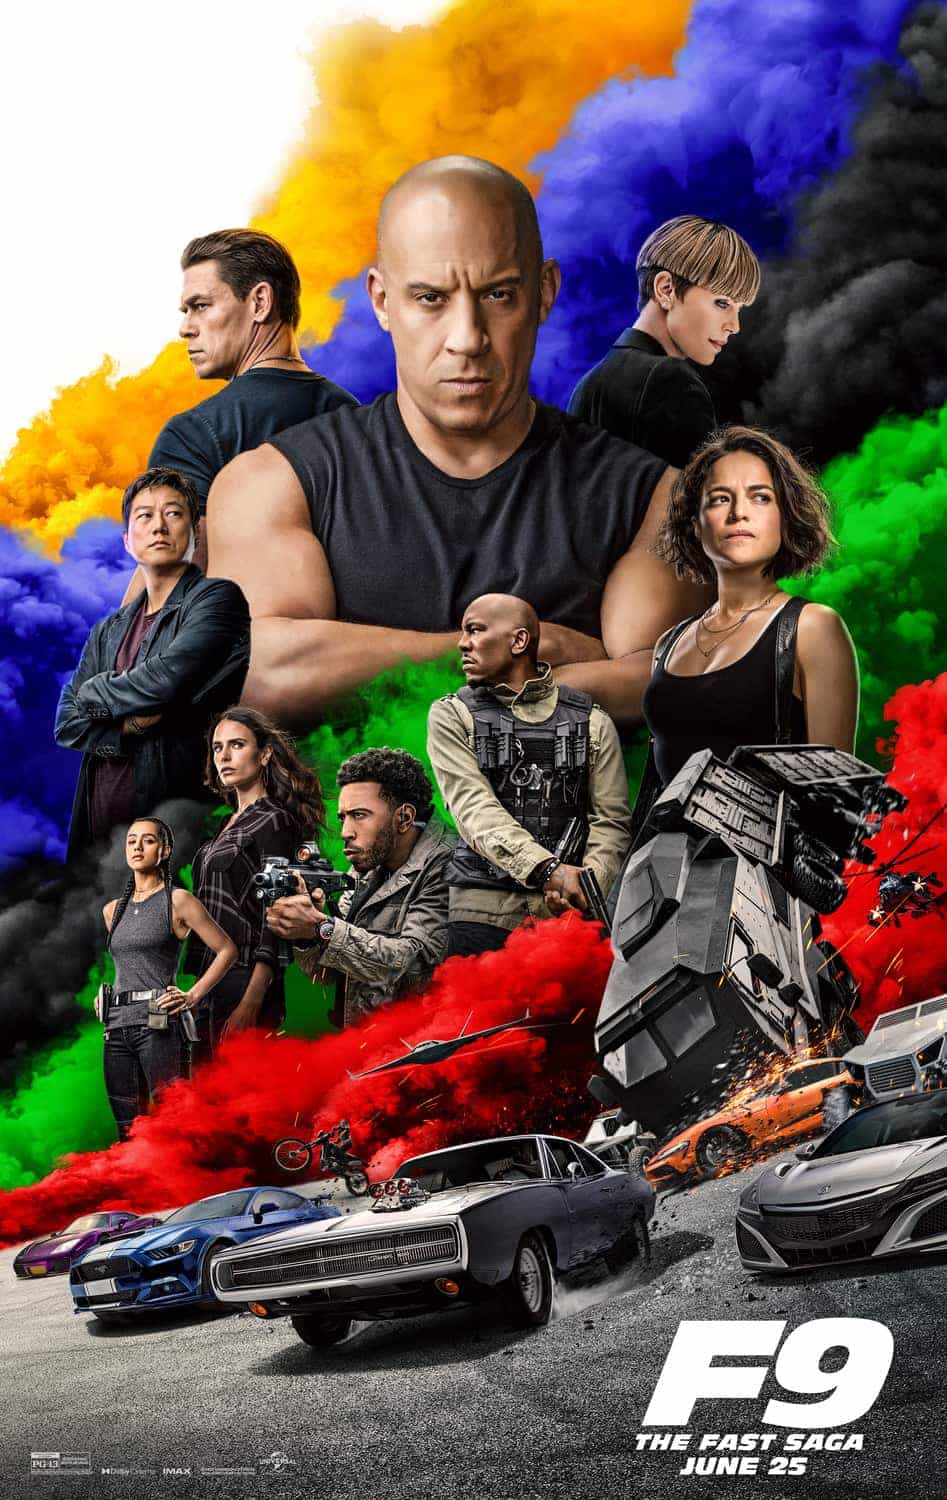 Vin Diesels stars in the first action packed trailer for Fast And Furious 9 which was announced at a concert in The Fast Saga